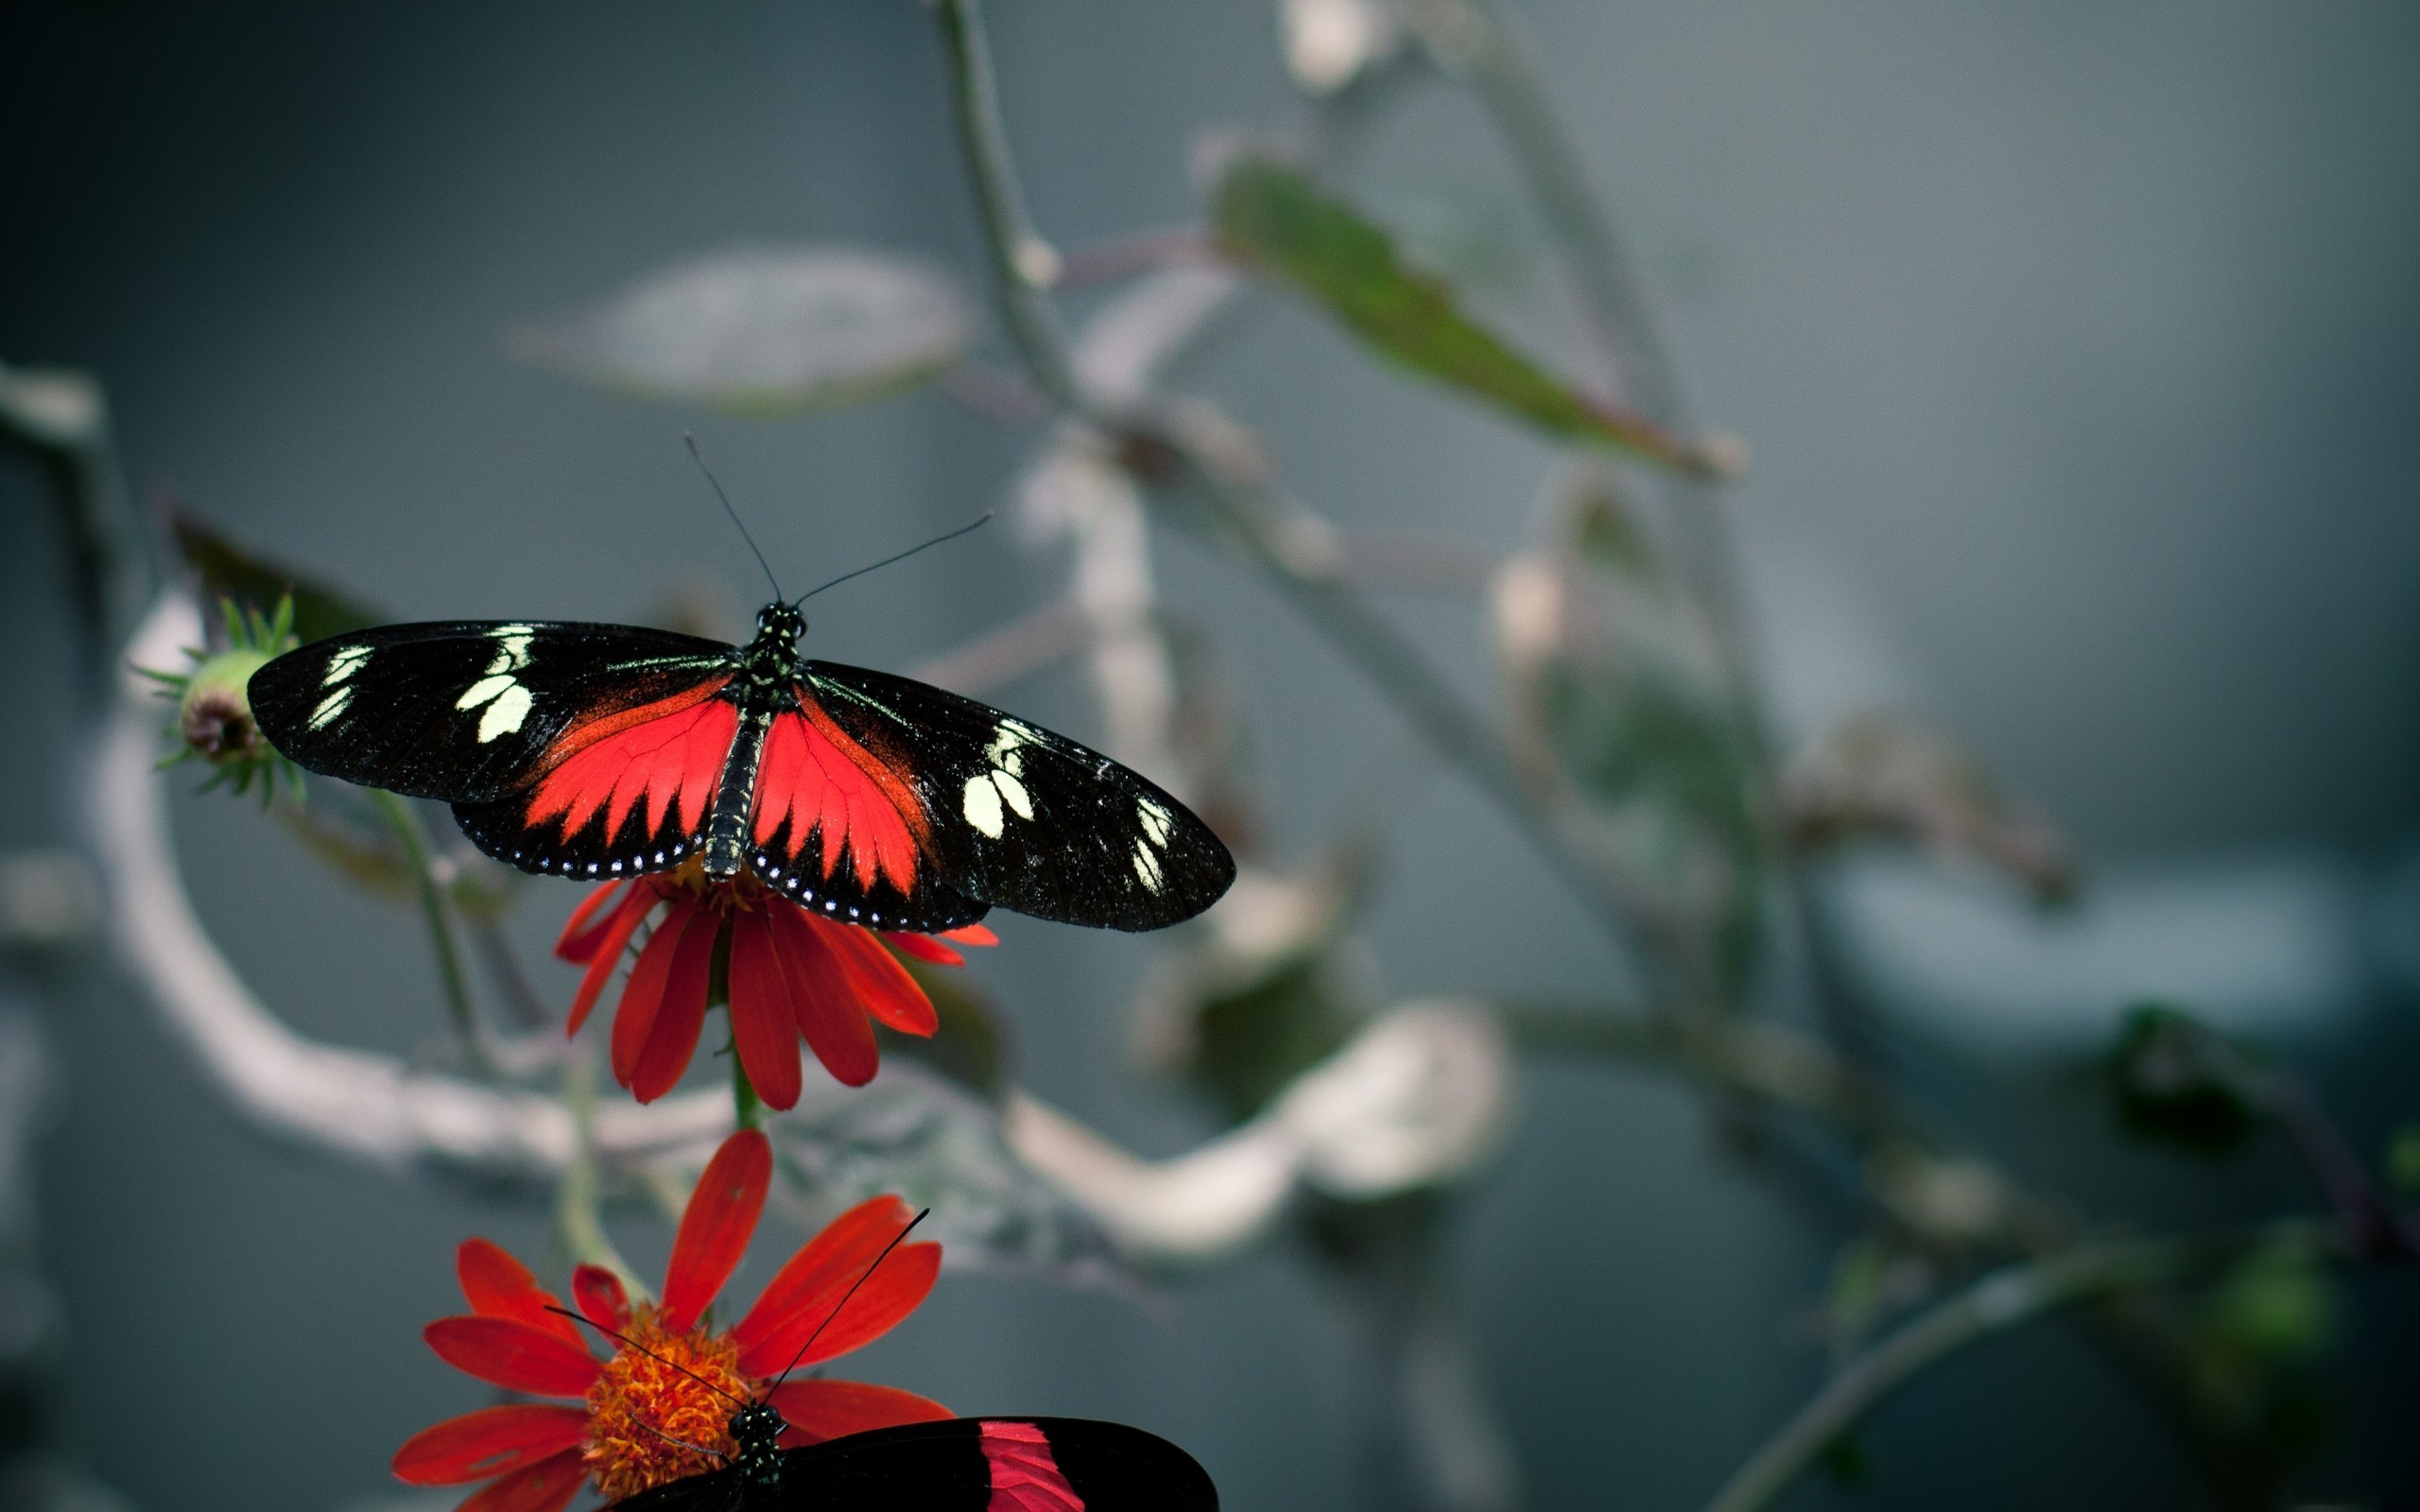 General 2560x1600 butterfly insect animals